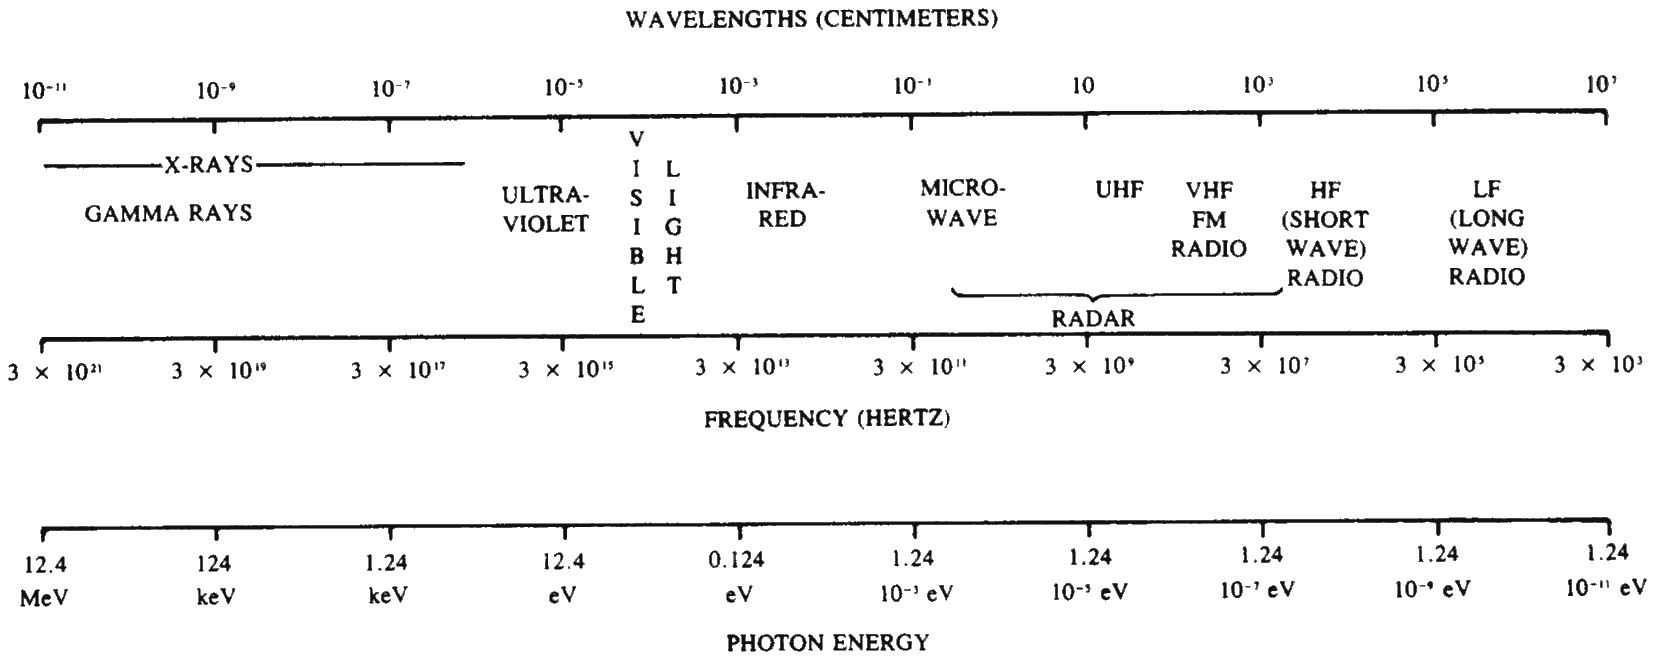 Three lines correlating radiation wavelengths in centimeters to frequency in Hertz and photon energy in electron-volts. The wavelength line spans from gamma rays at 10 to the -11 through long-wave radio at 10 to the 7. The frequency line spans from 3 × 10 to the 21 through 3 × 10 cubed. The photo energy line spans from 12.4 megaelectron-volts through 1.24 × 10 to the -11 electron-volts.